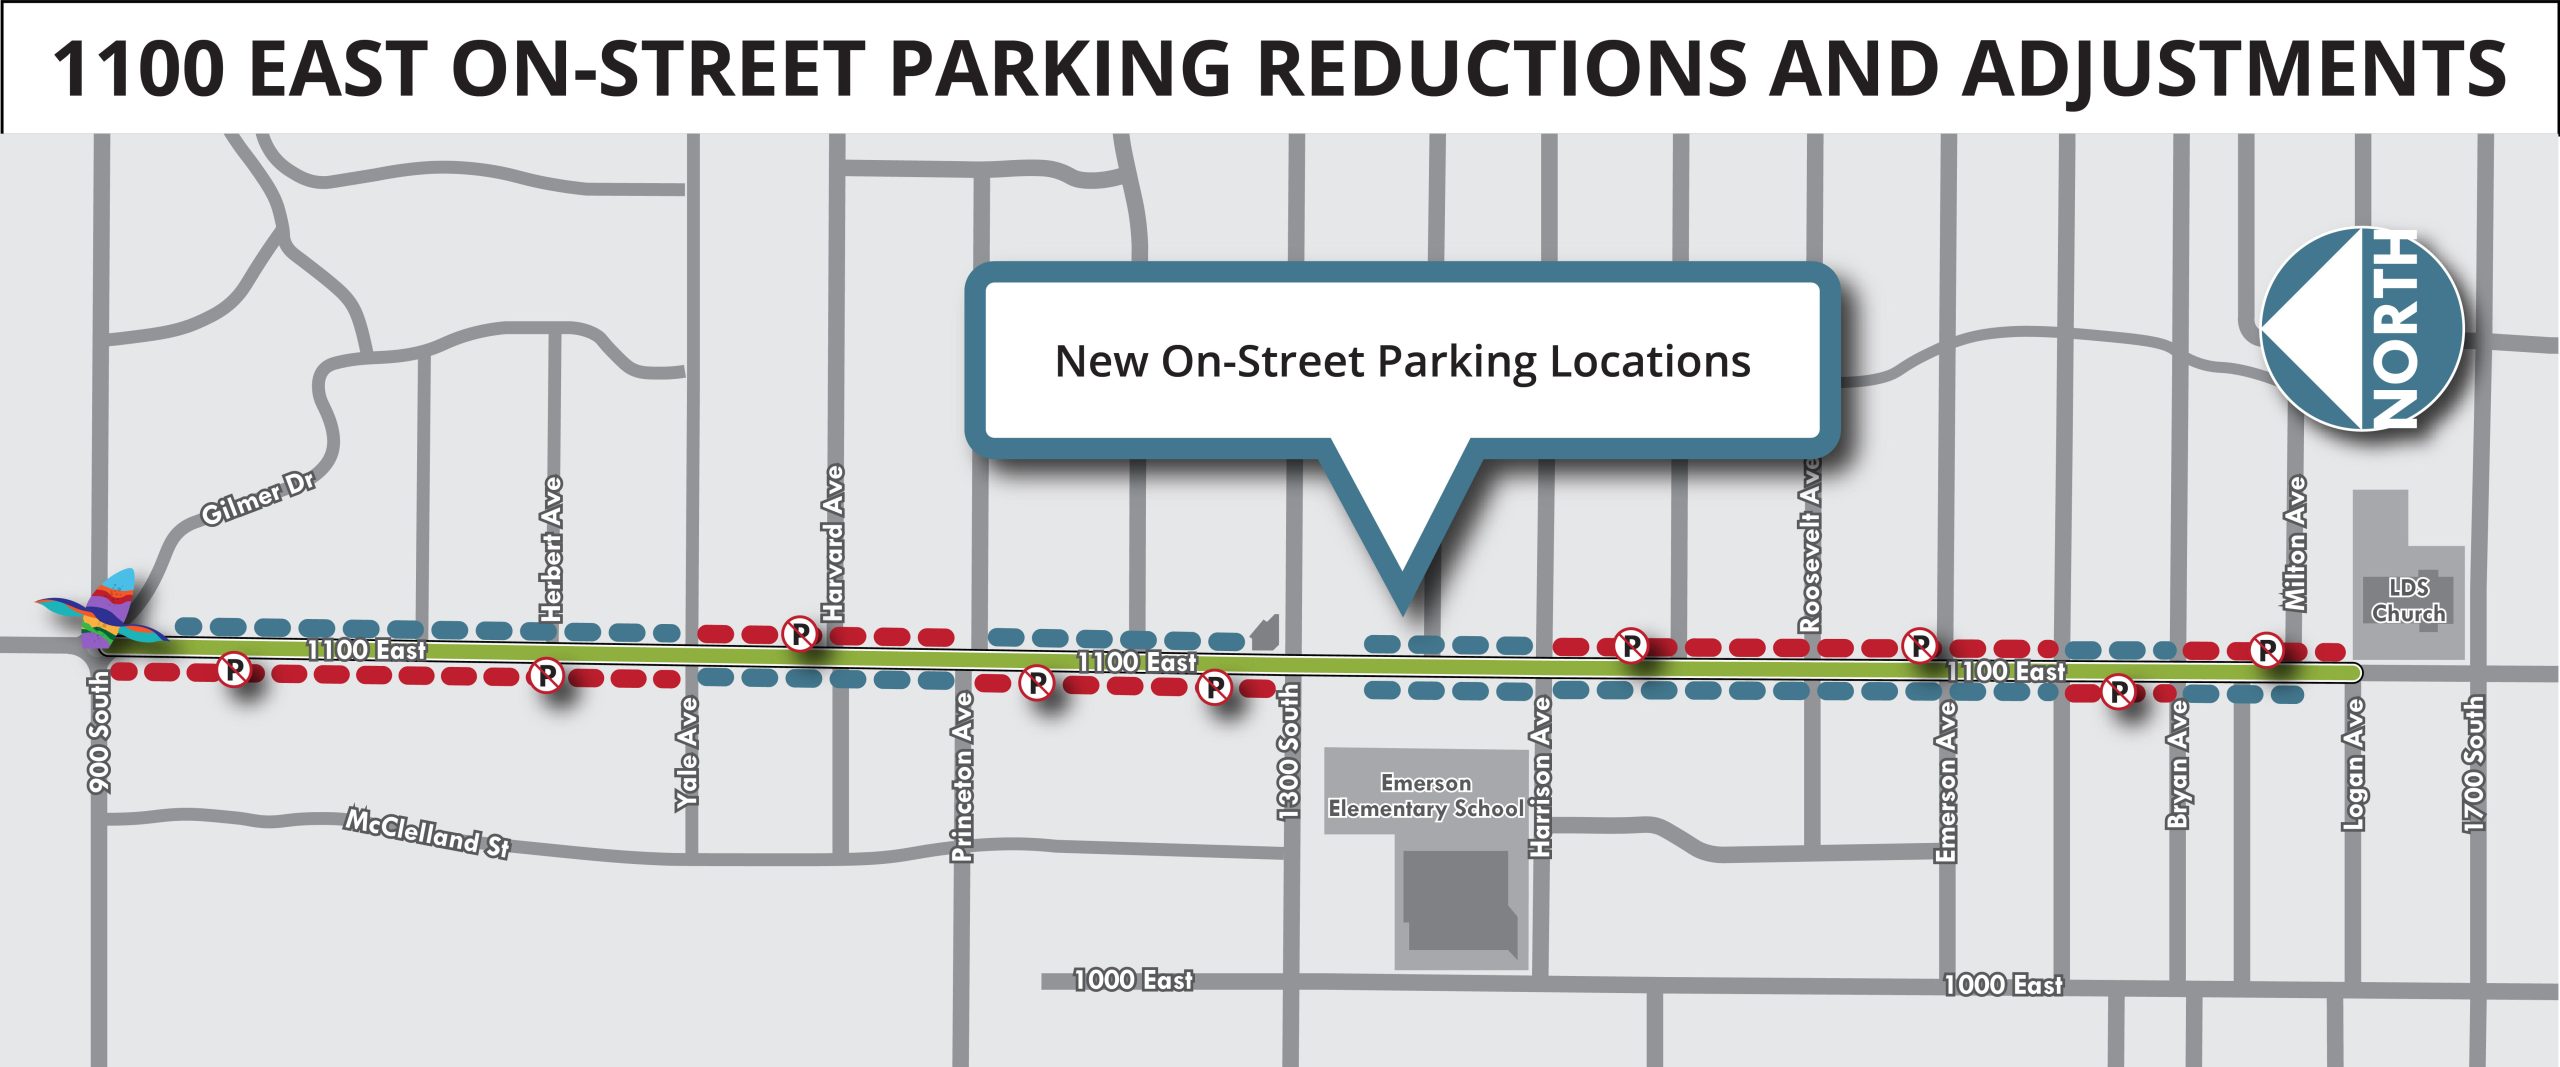 A map of the on-street parking updates to 1100 East.